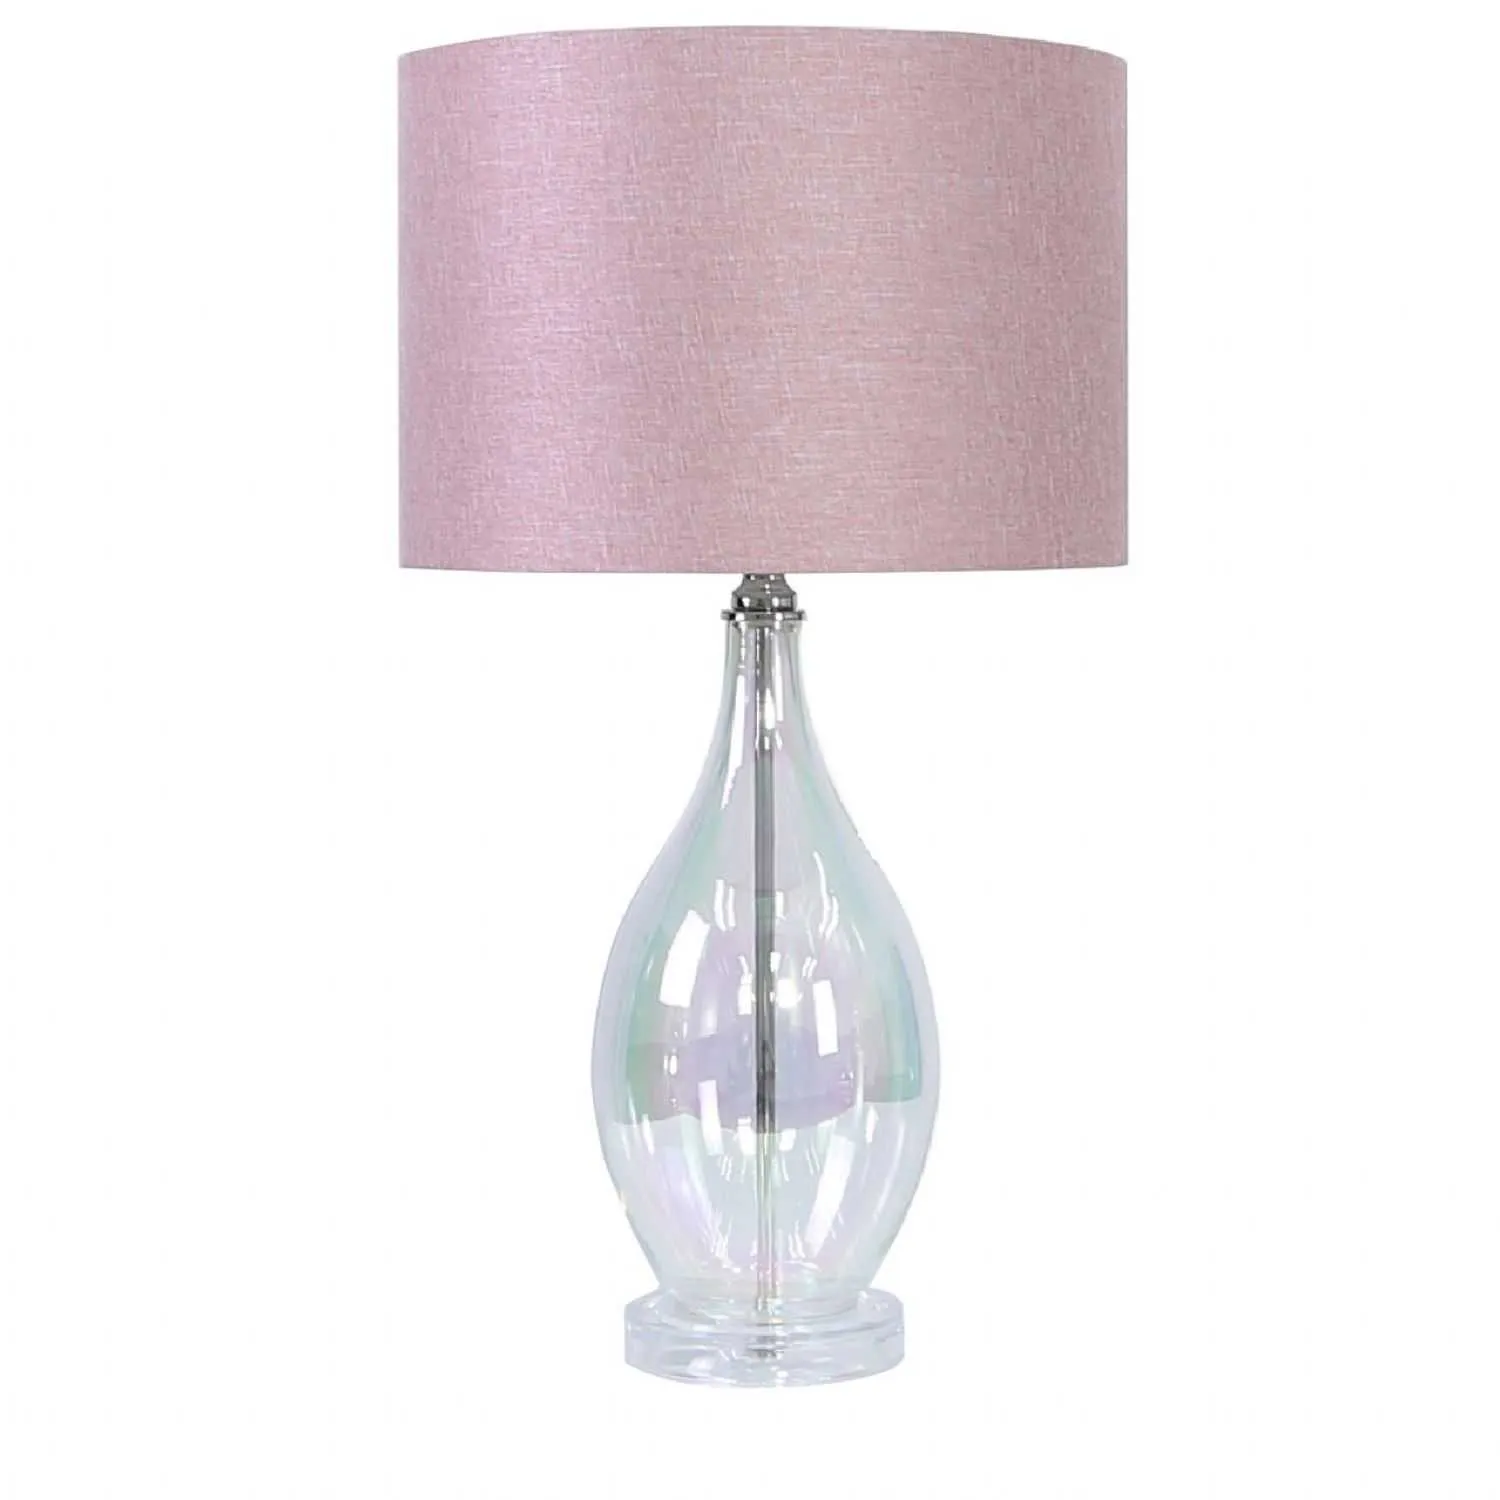 60cm Lustre Glass Table Lamp With Pink Shade